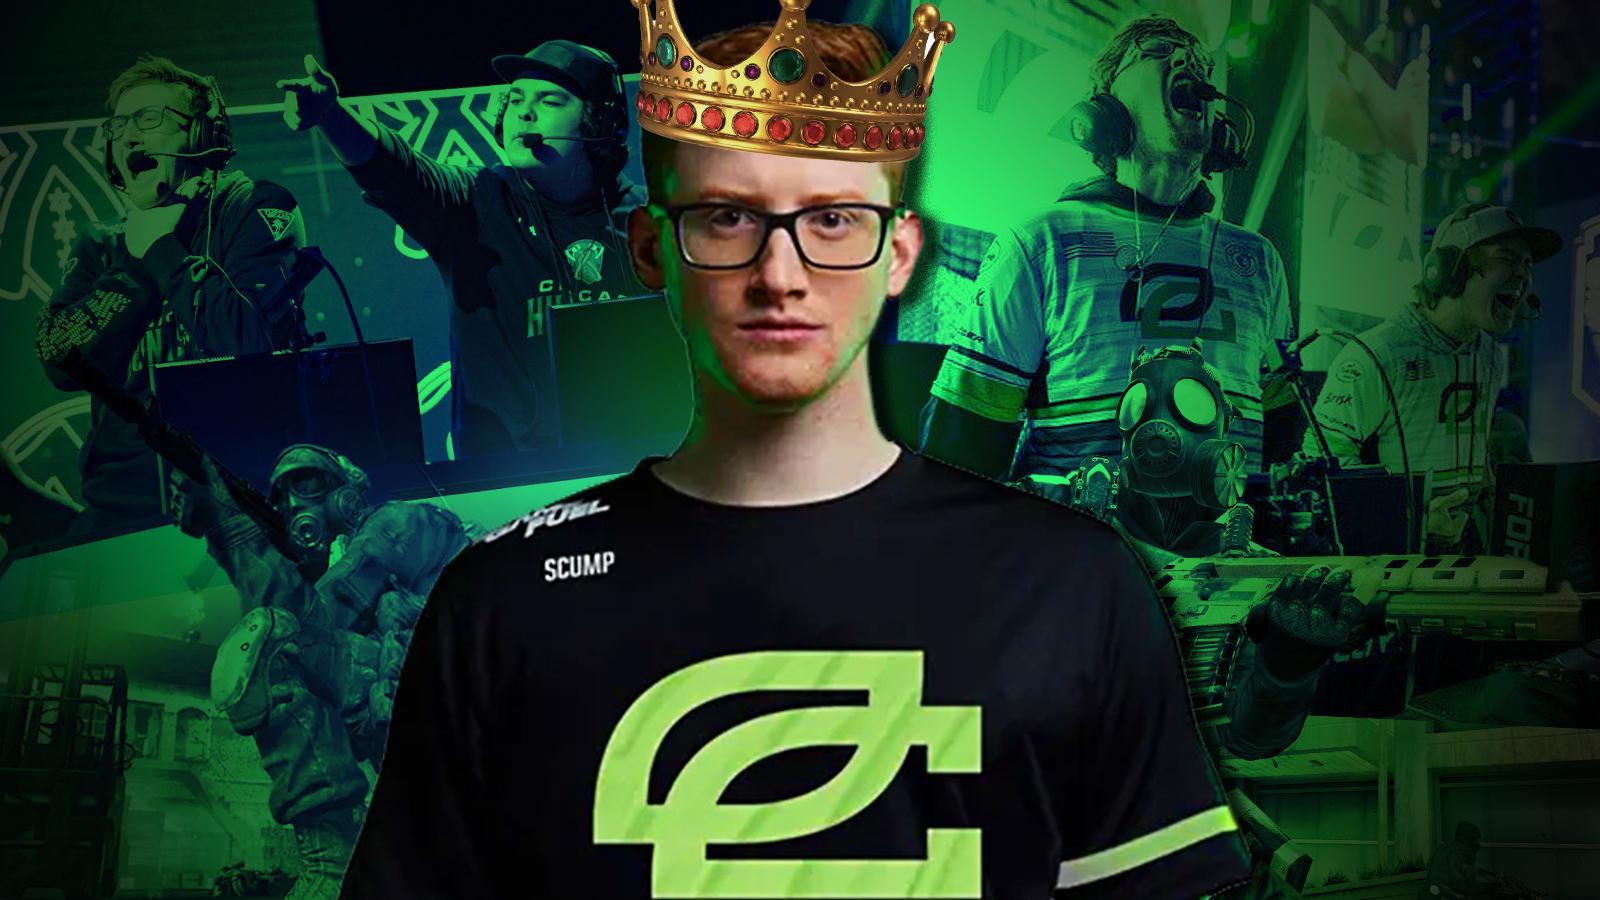 OpTic Scump in front of a wall of his achievements in the pro CoD scene.